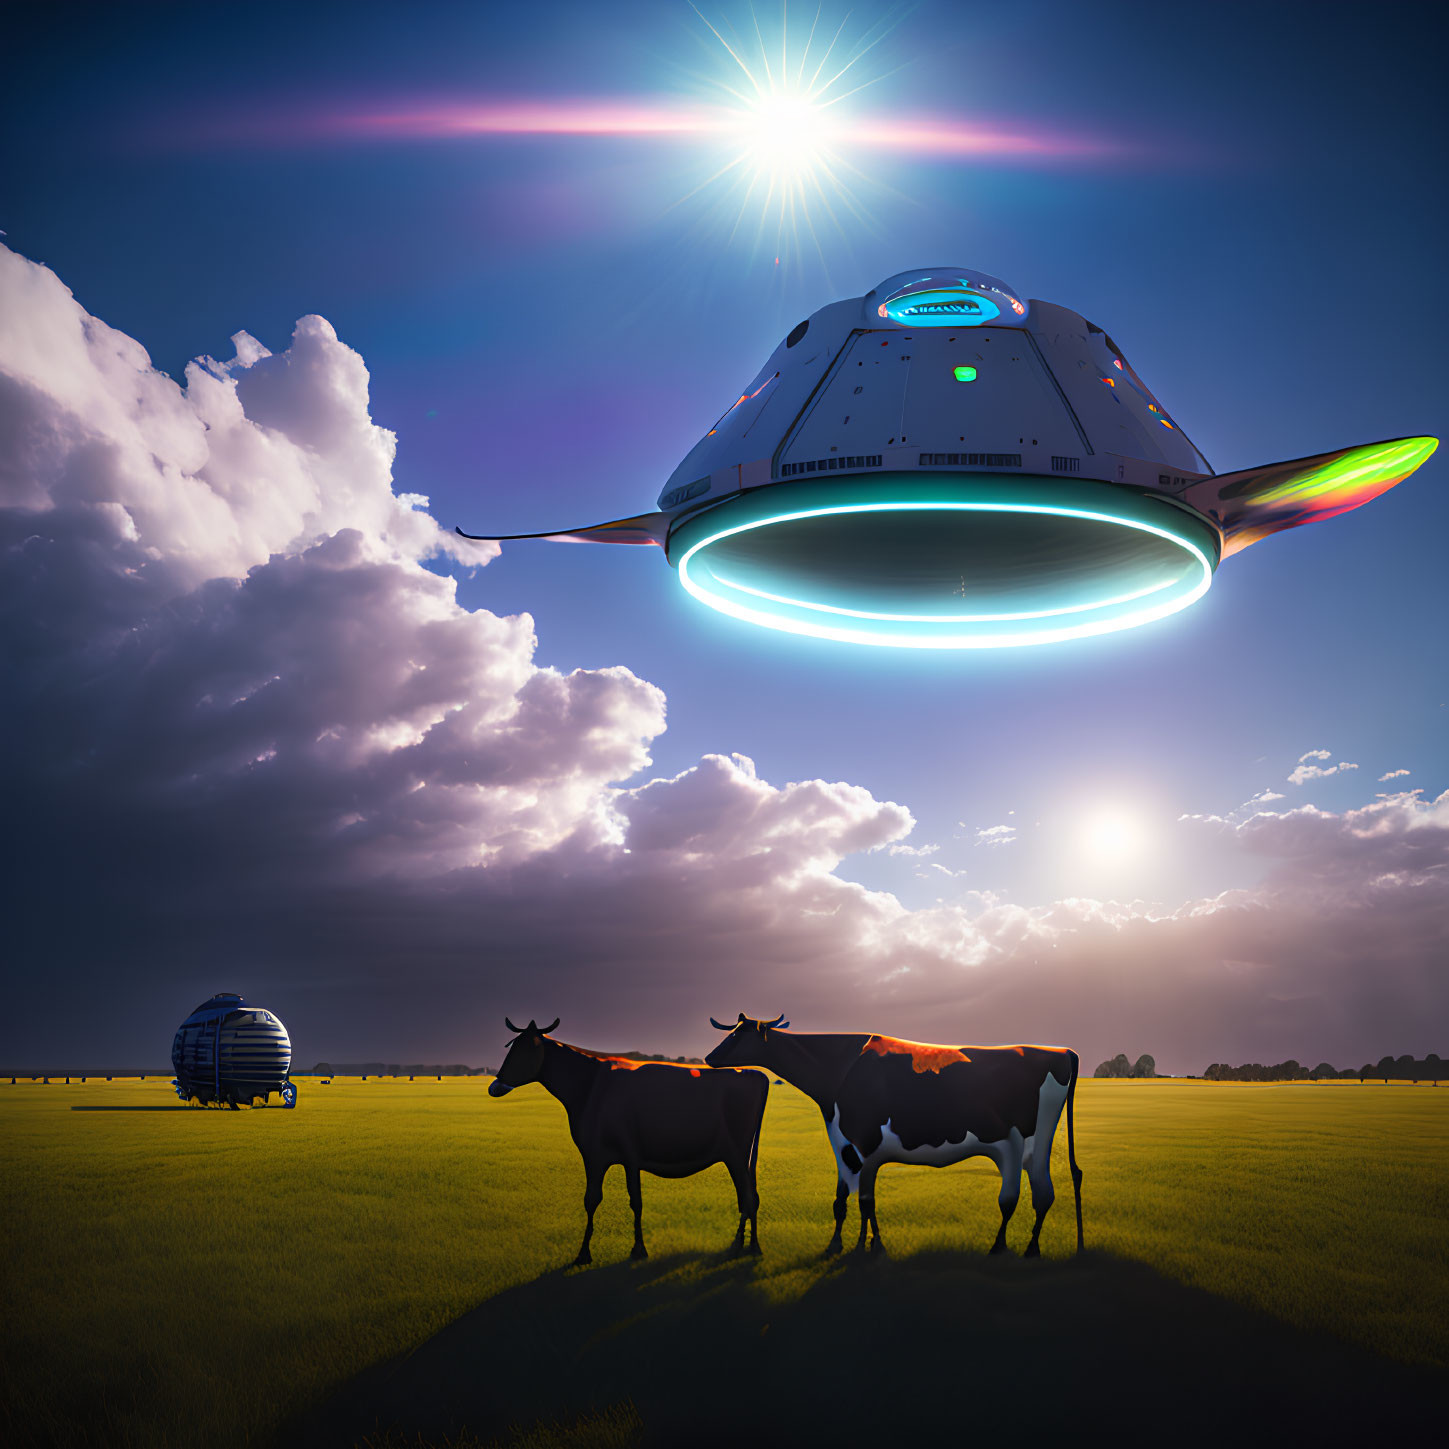 Unidentified Flying Object shines light on cows in field at sunset